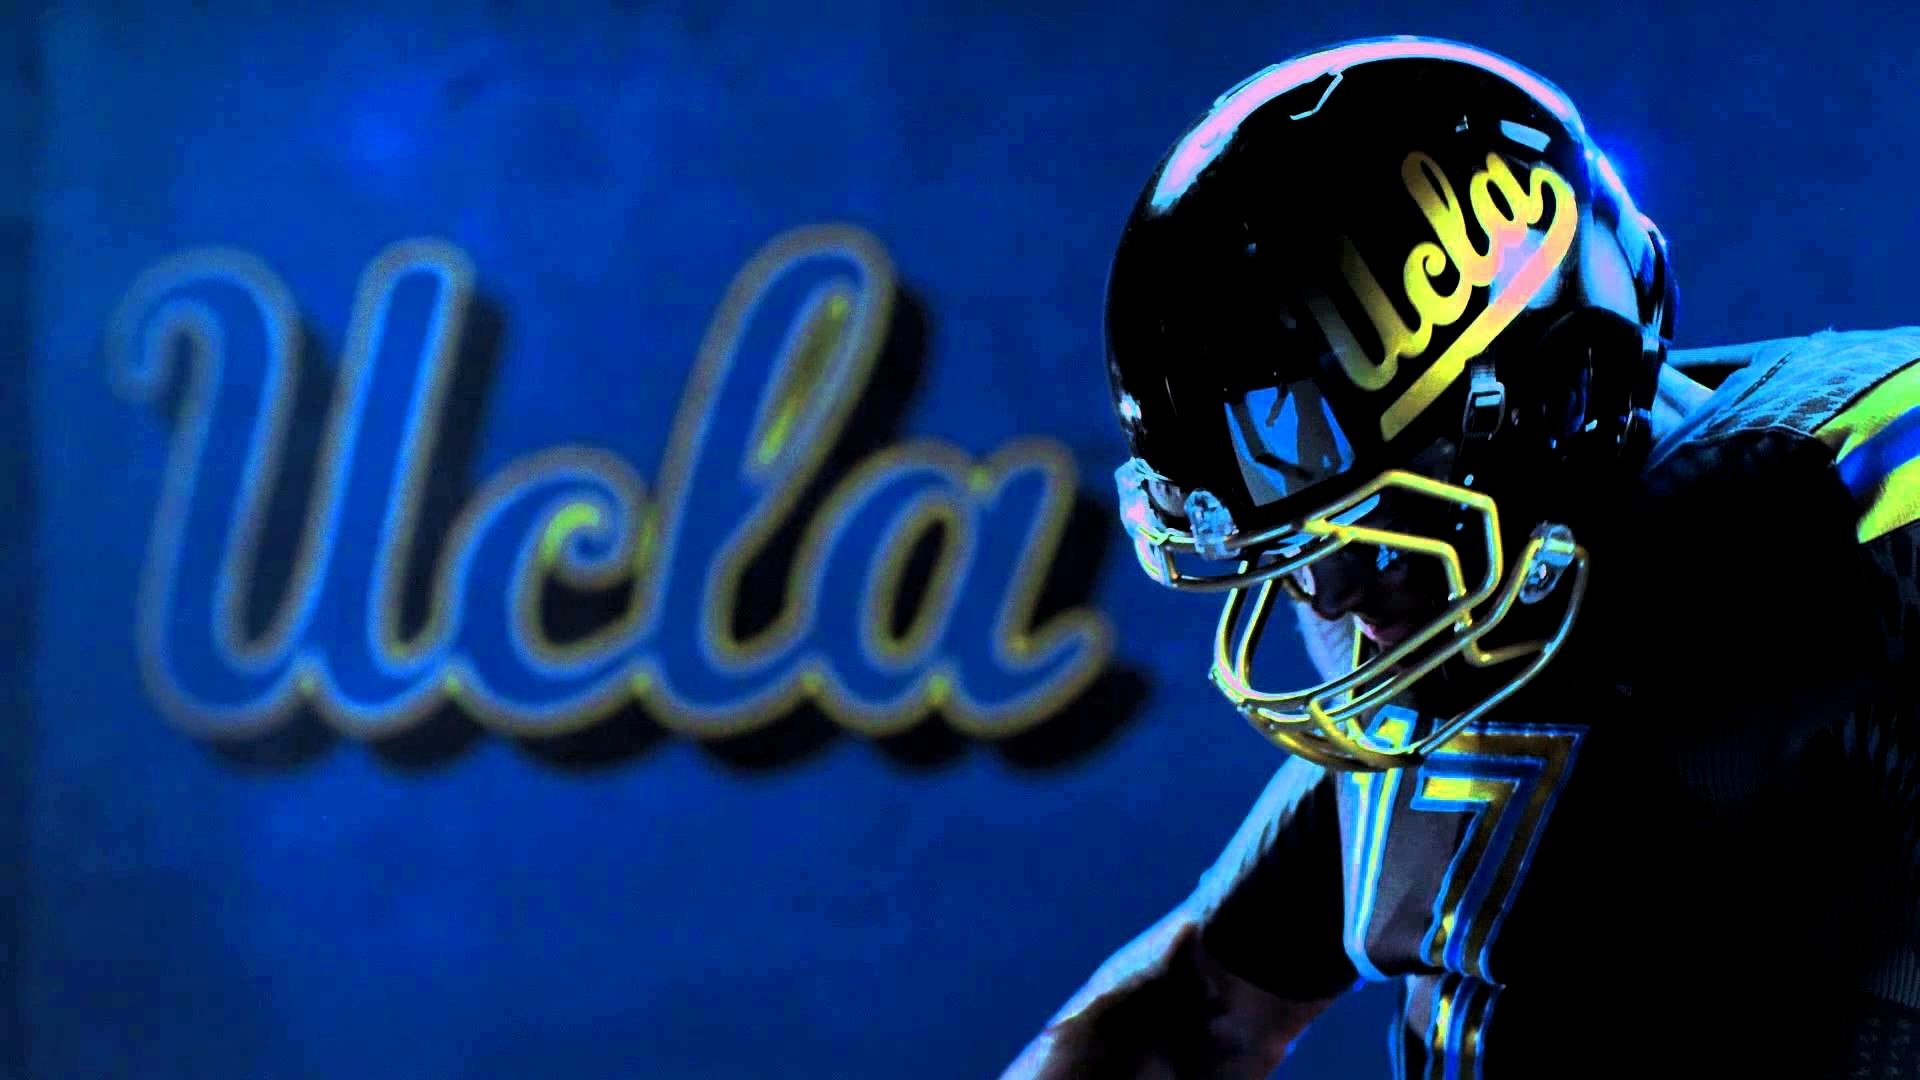 Ucla to HD wallpapers  Pxfuel